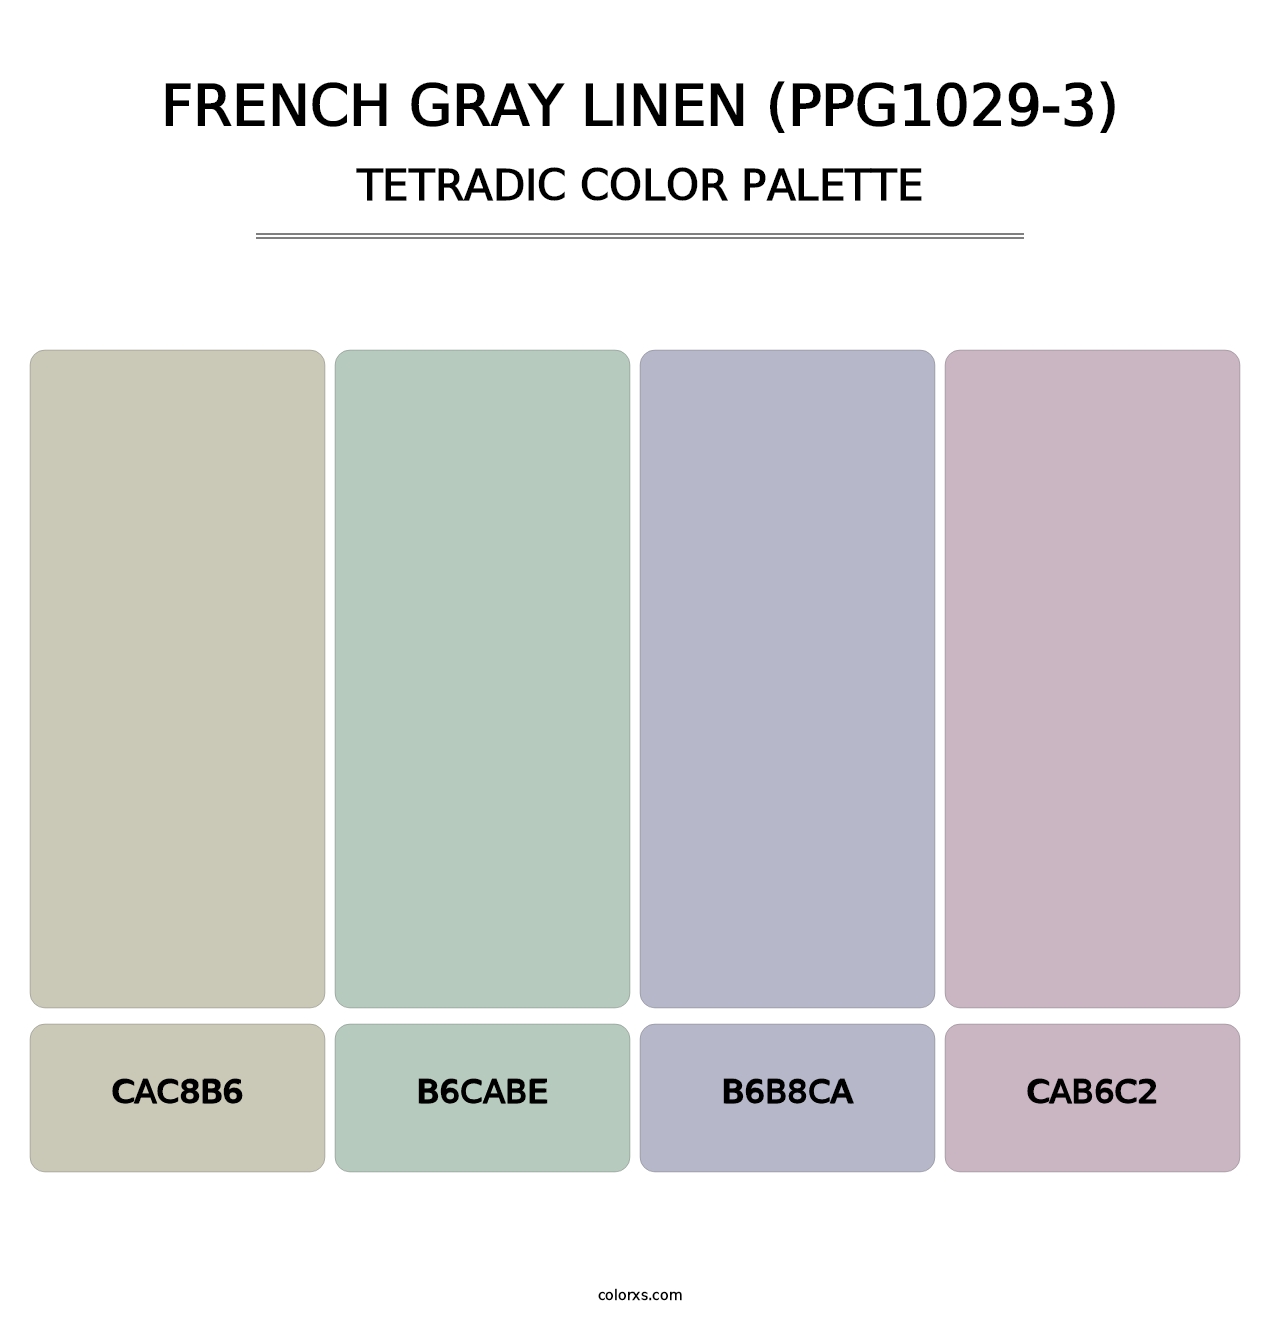 French Gray Linen (PPG1029-3) - Tetradic Color Palette